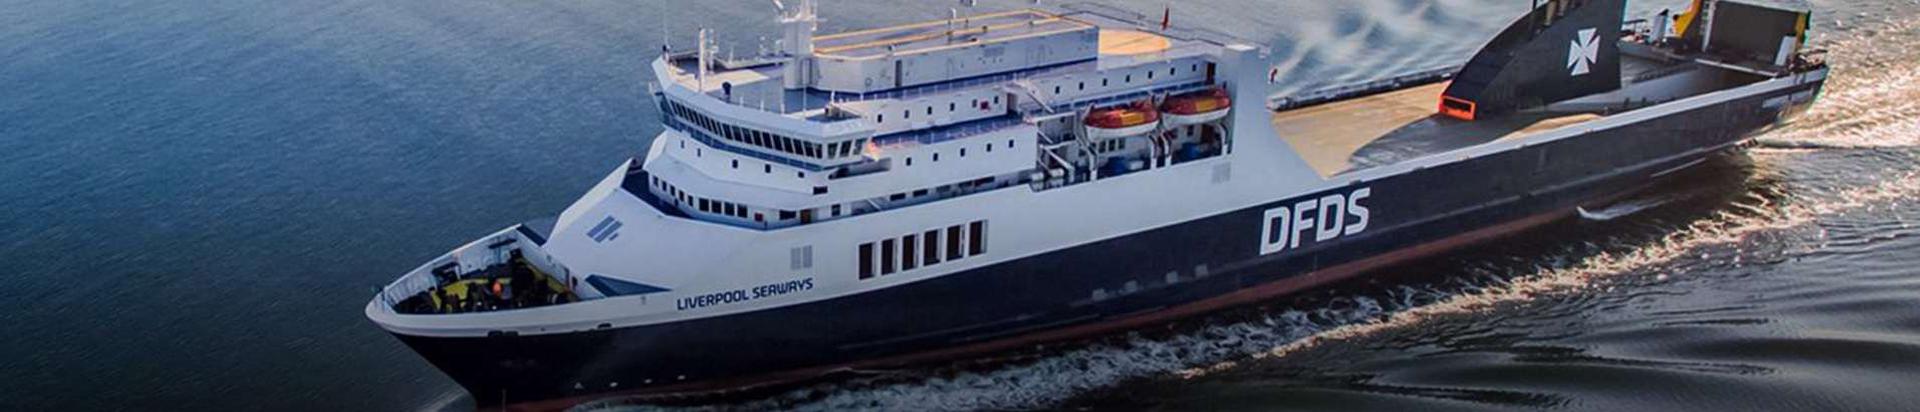 Largest trustworthy company DFDS A/S EESTI FILIAAL, reputation score 8780, active business relations 1. Mainly operates in the field: Maritime transport and vessel agency.